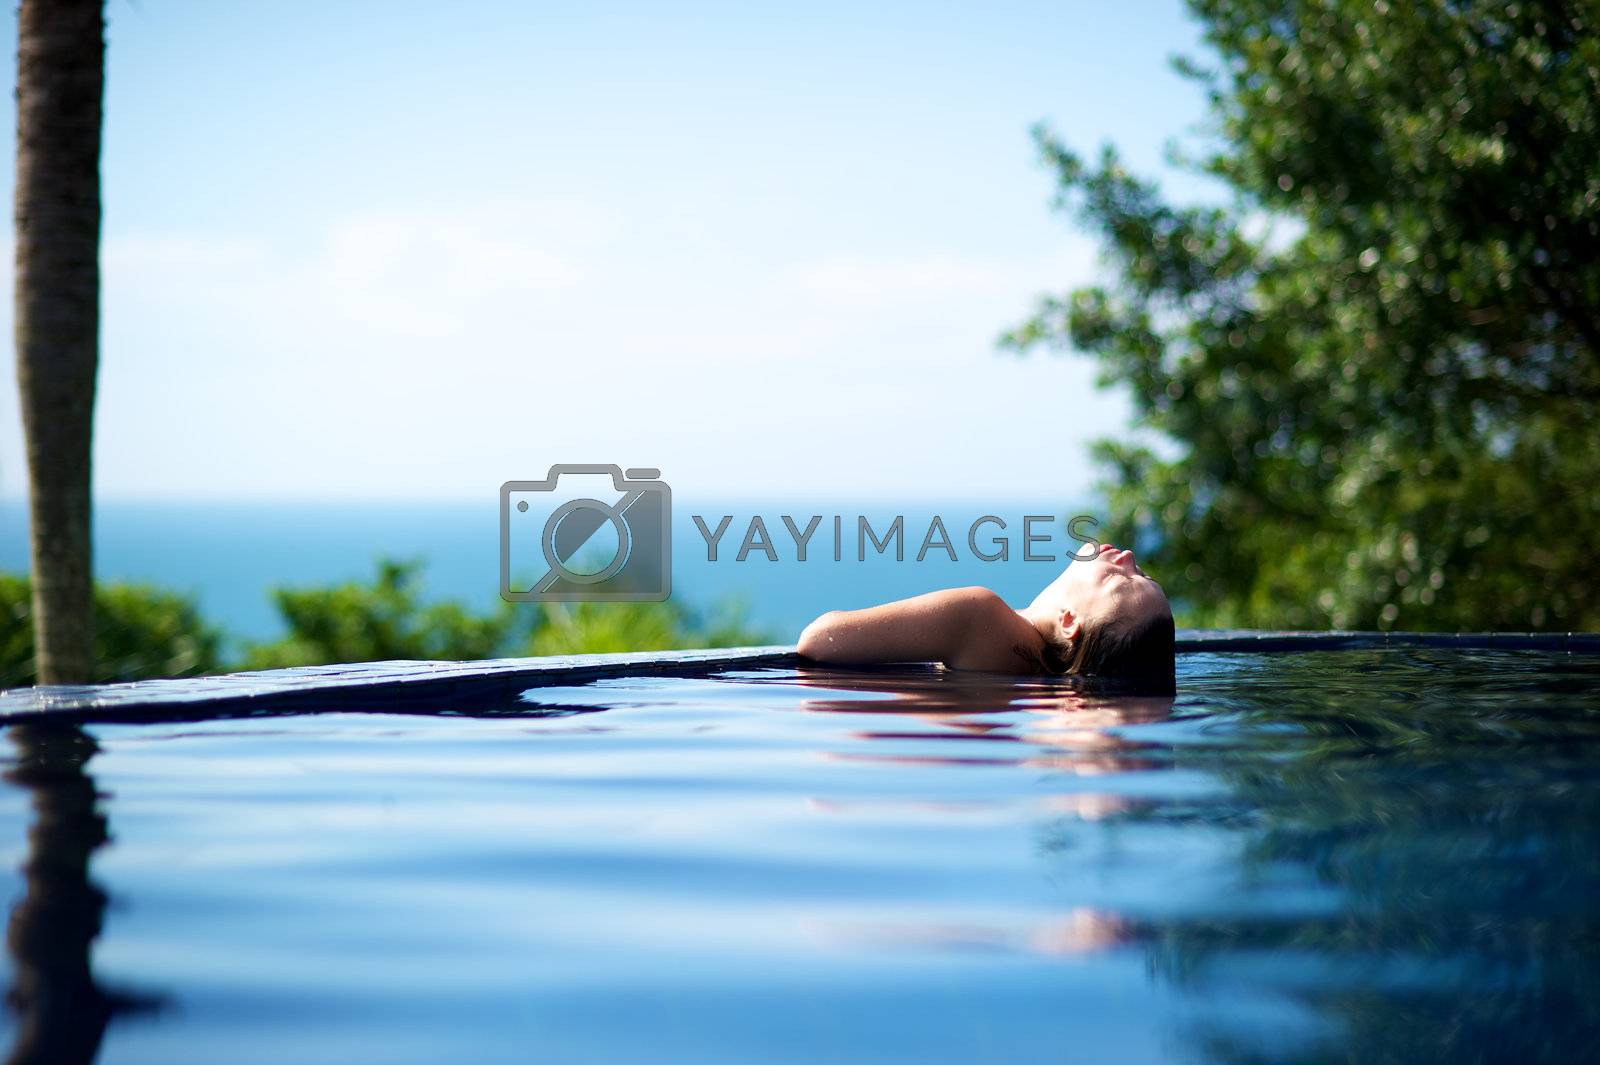 Royalty free image of Paradise swimming pool by swimnews